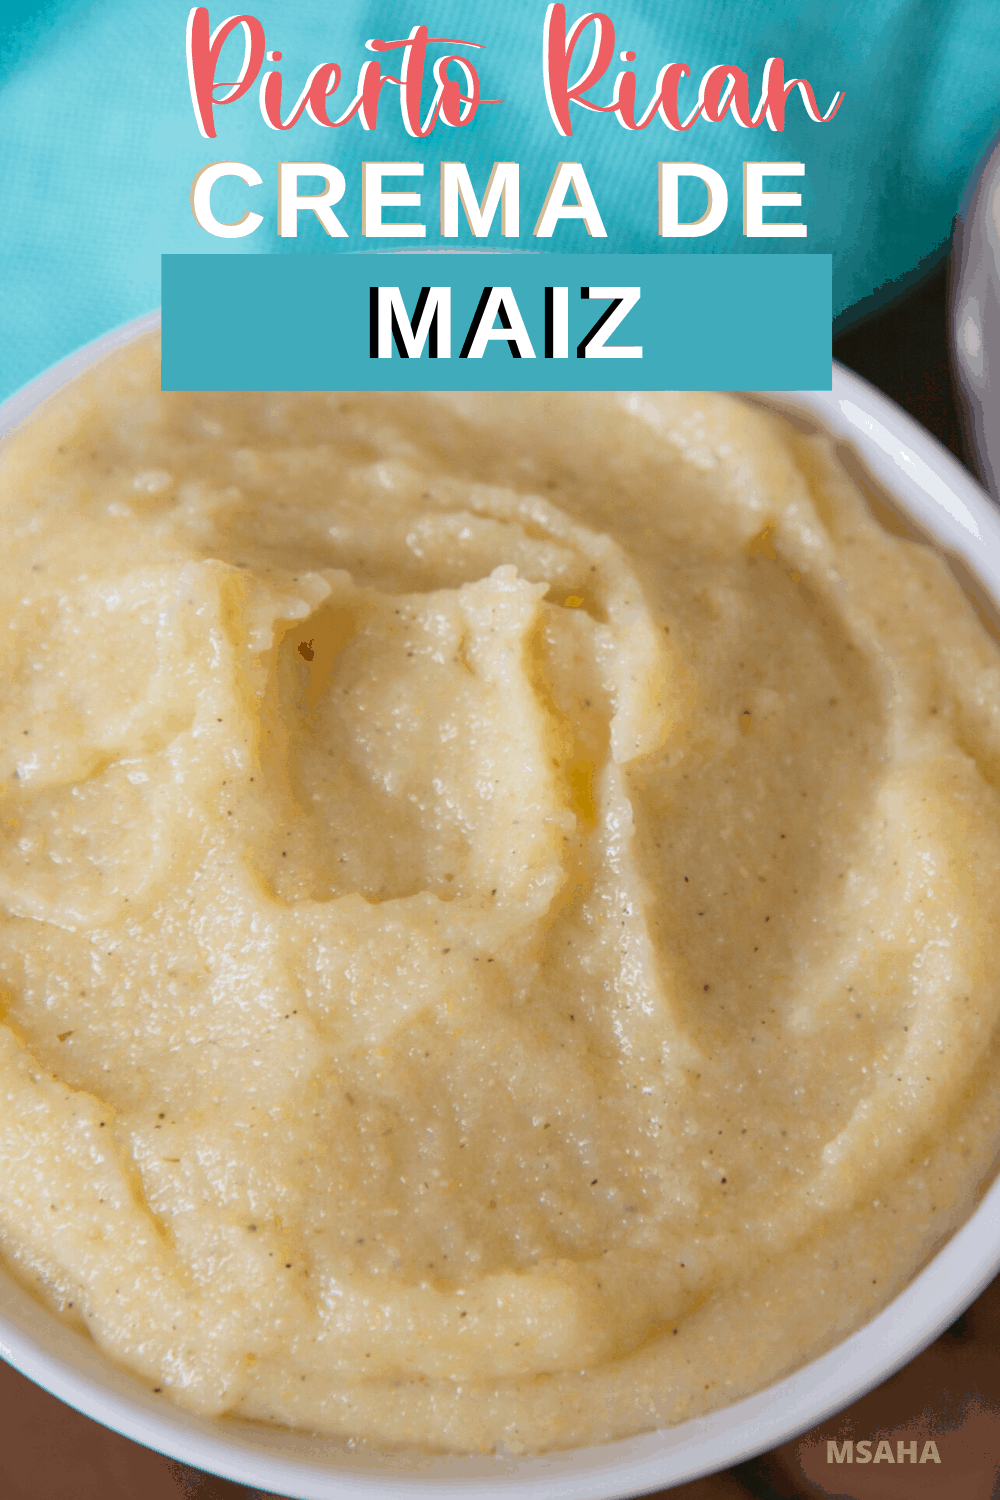 When it comes to Puerto Rican breakfast, Crema de Maiz is one of my favorite childhood cornmeal cereal recipes. Learn how you can make this delicious recipe. #puertoricanfood #puertoricanrecipe #puertoricanbreakfast via @mystayathome